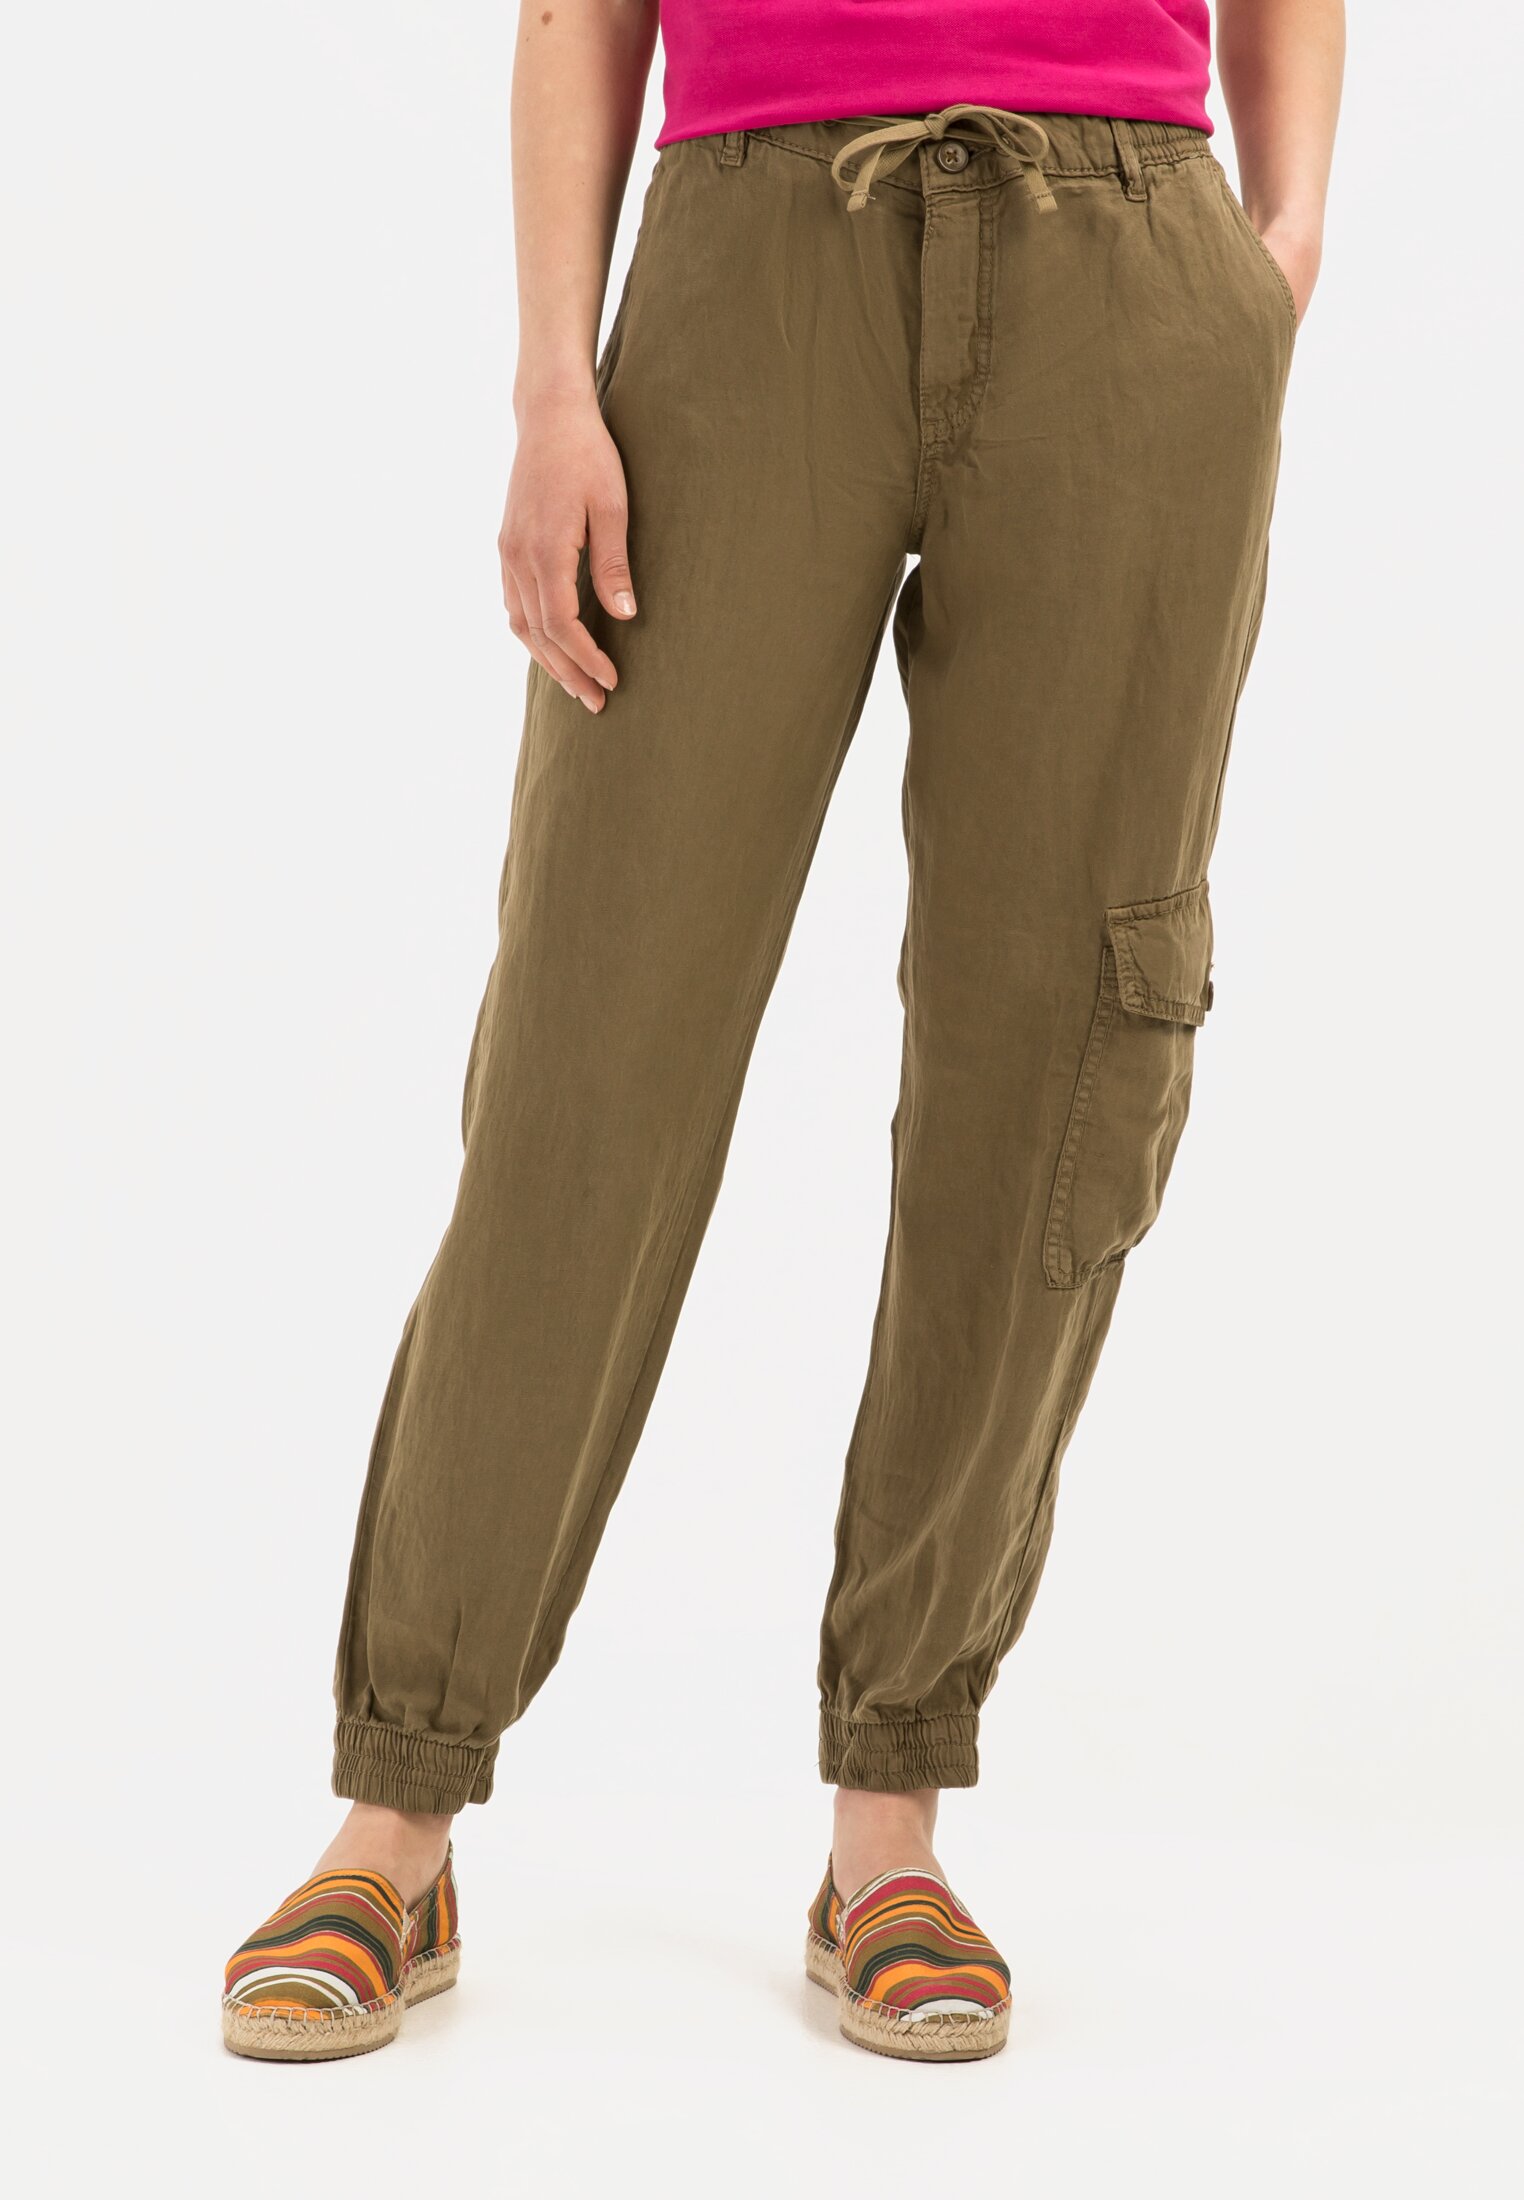 Camel Active Joggpants made from linen mix